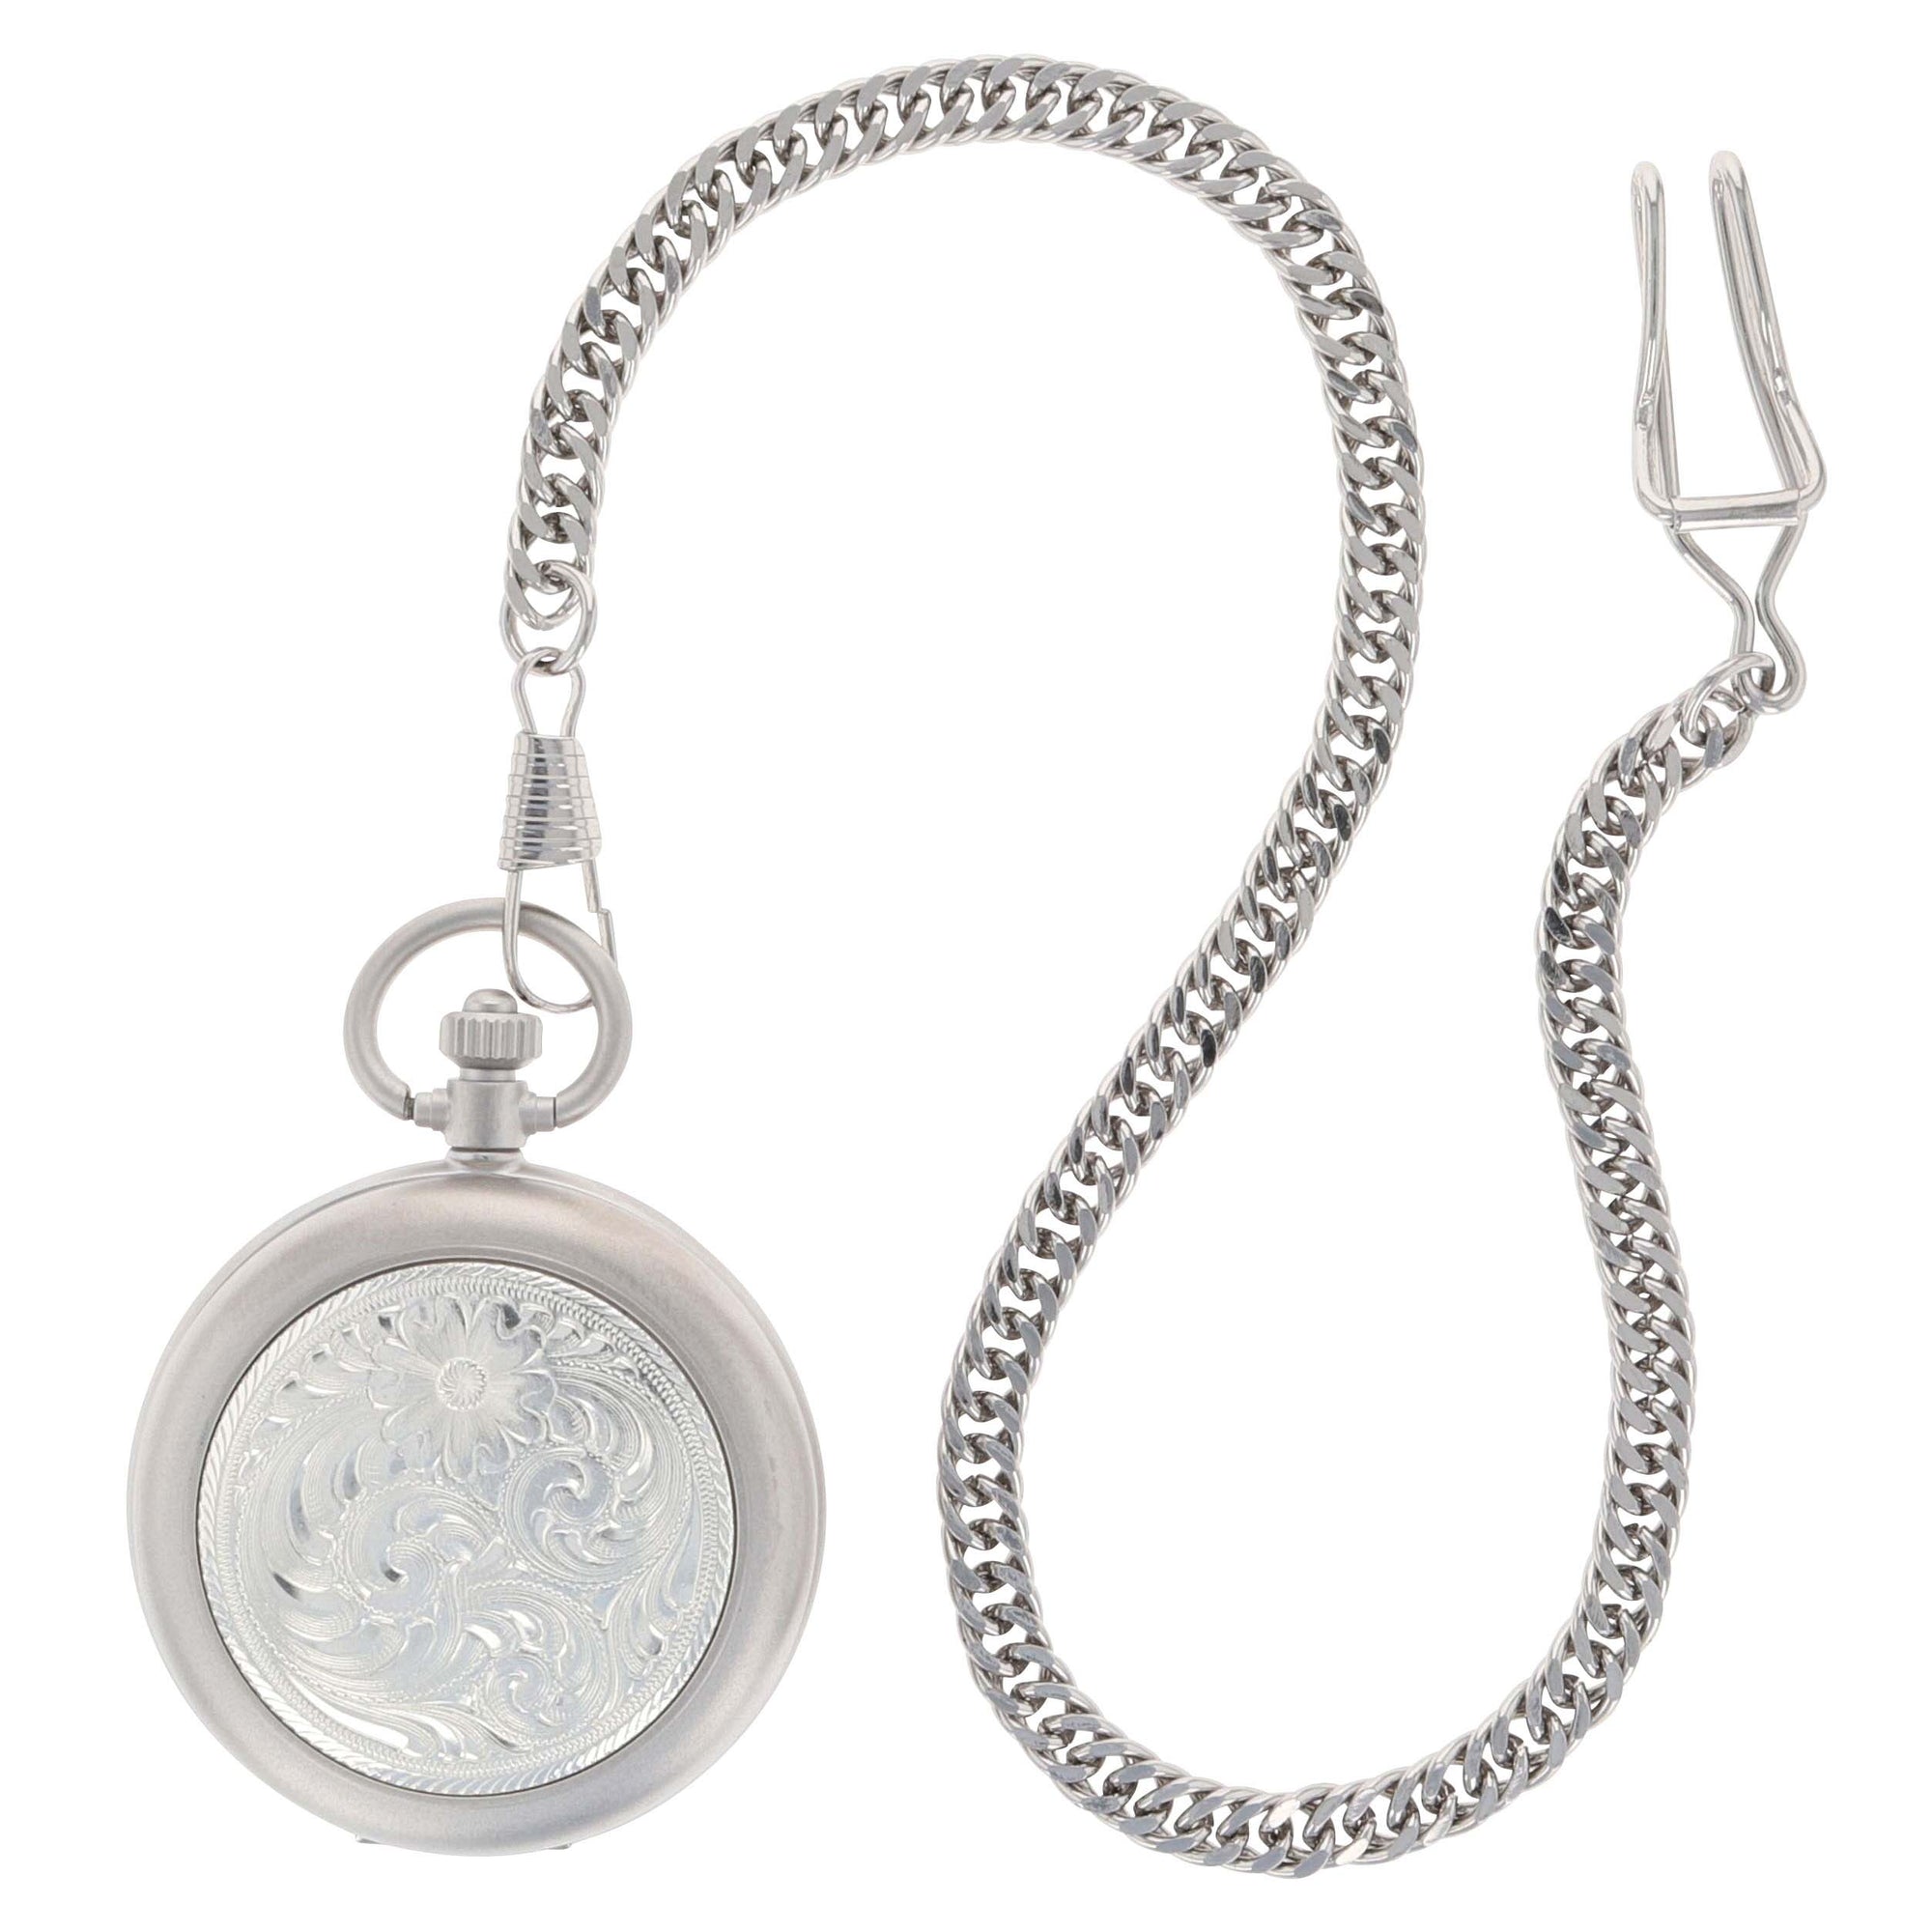 Montana Silversmiths Engraved Pocket Watch STYLE WATCHP10